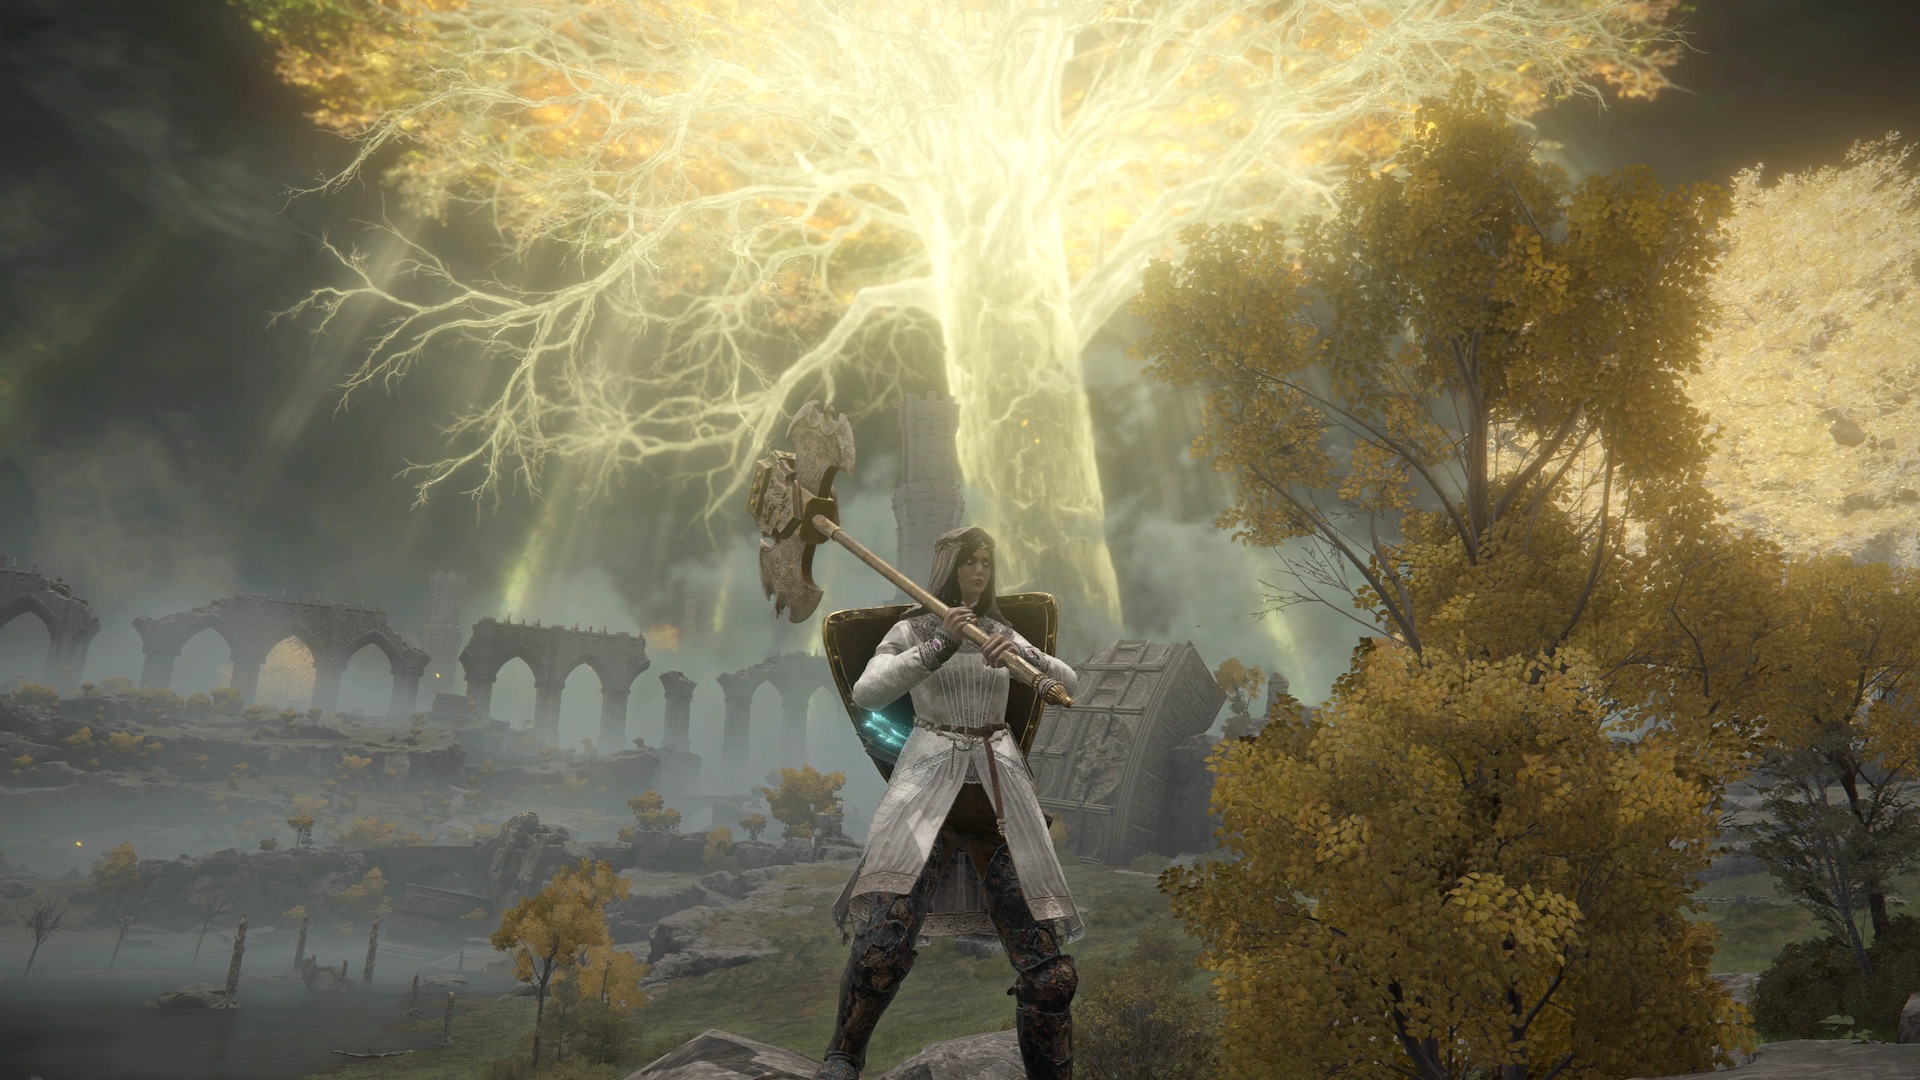 A Tarnished wields a giant ax two-handed in a screenshot from Elden Ring